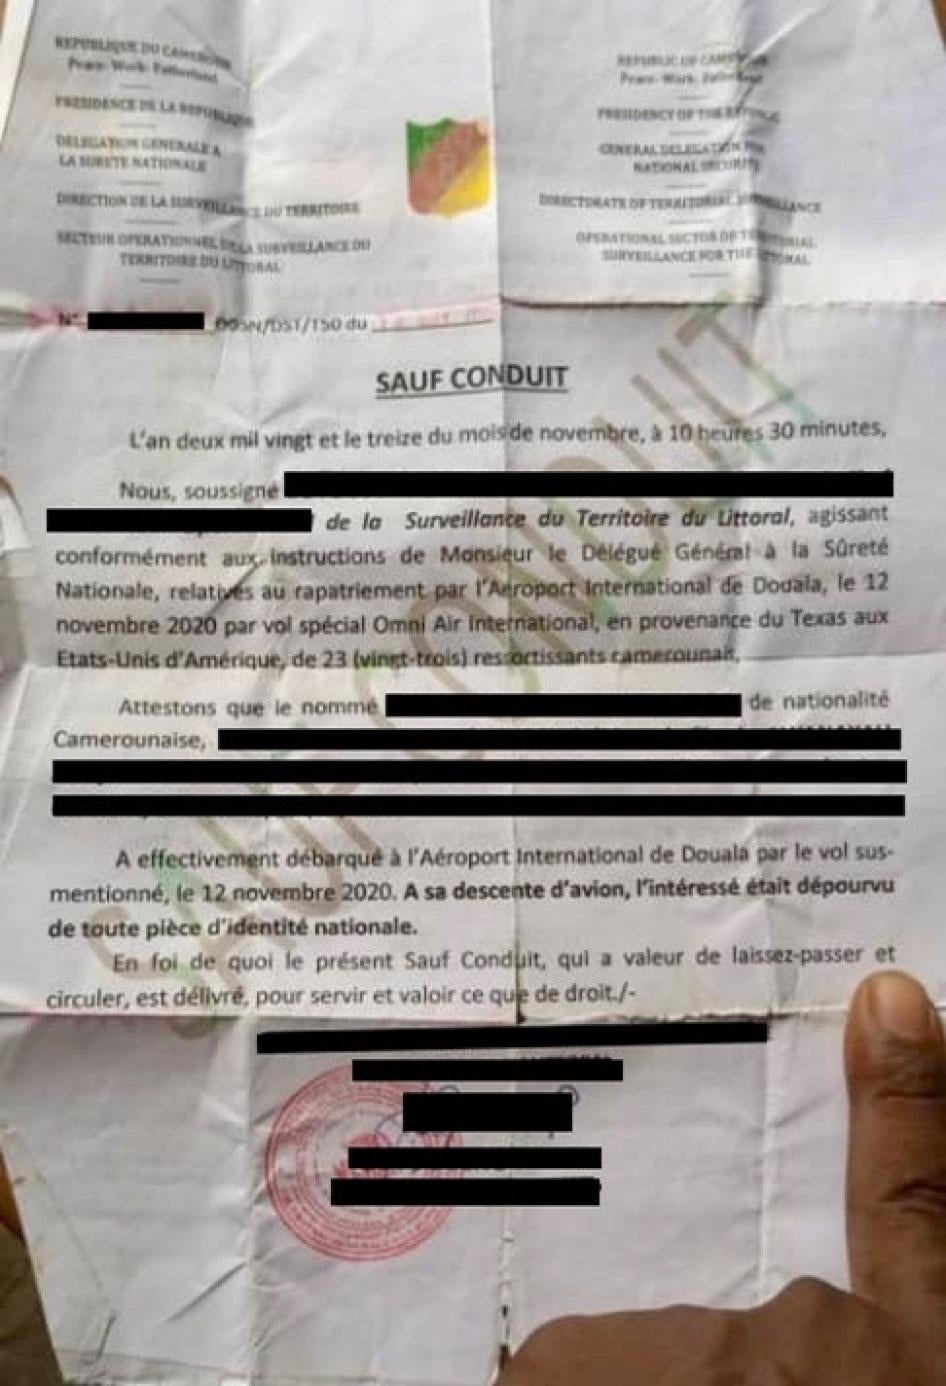 A redacted official document written in French